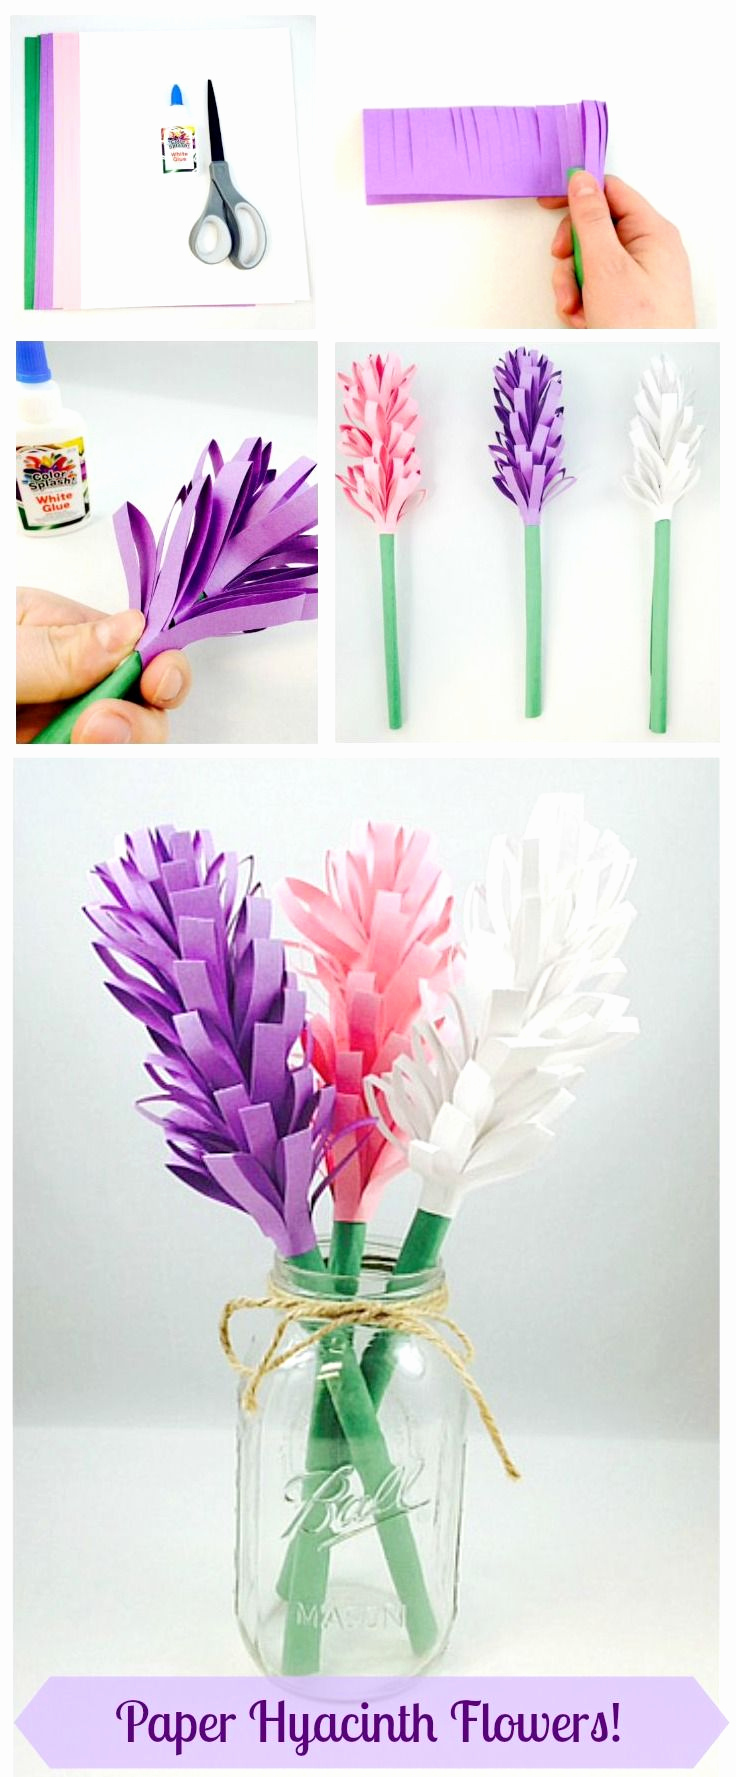 Construction Paper Crafts for Adults Elegant Easy Paper Hyacinth Flowers